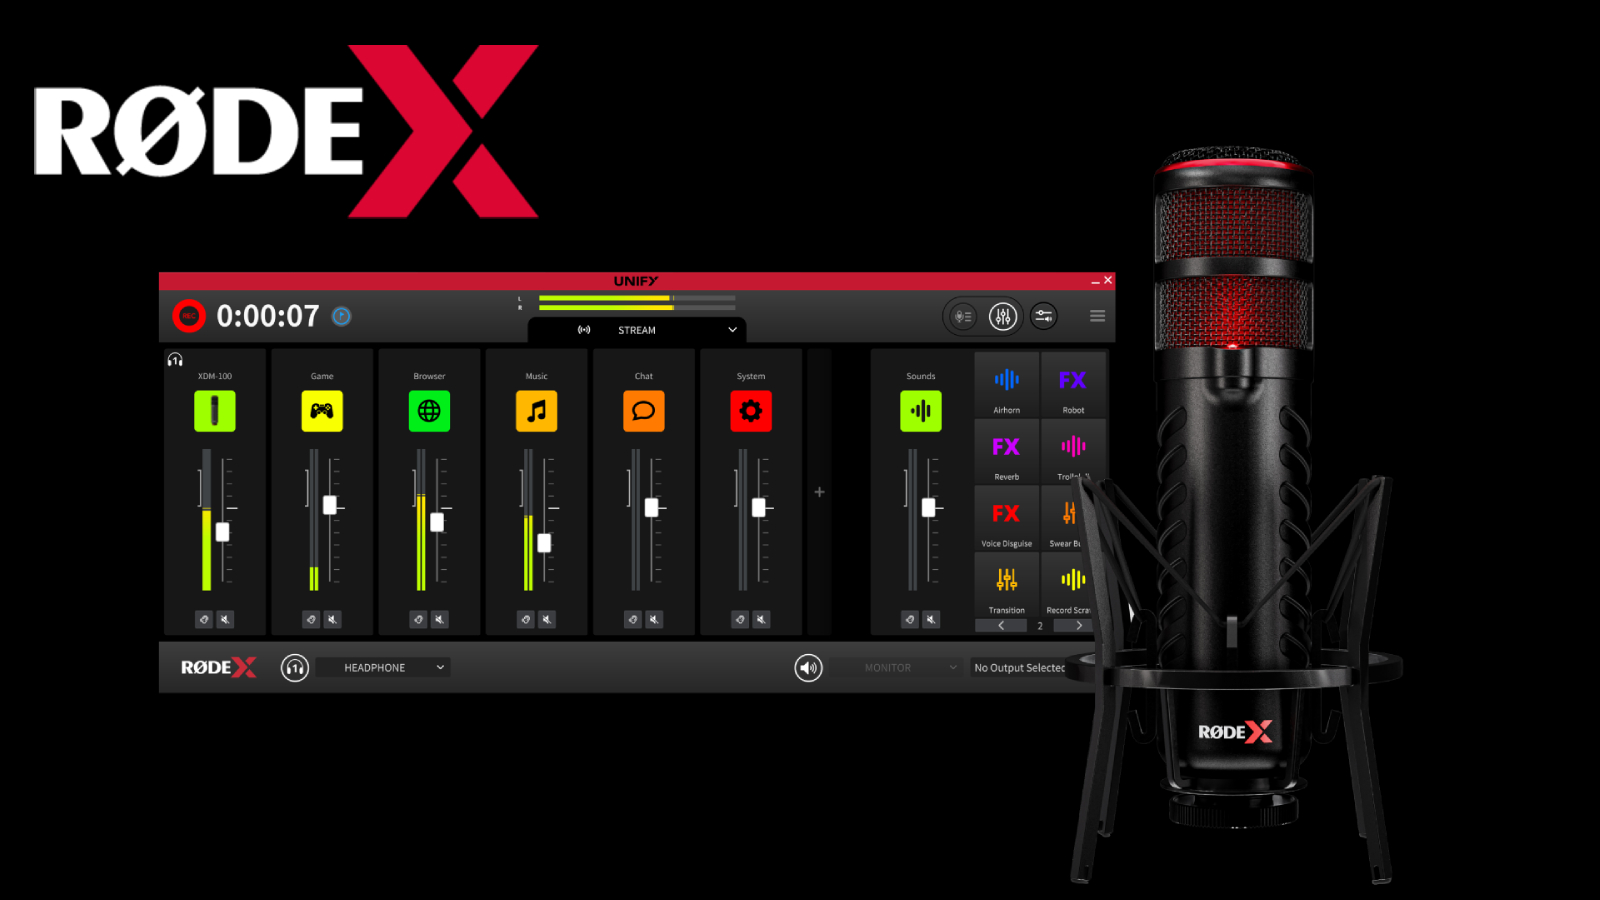 Rode X revealed: professional audio expertise coming to gamers and streamers